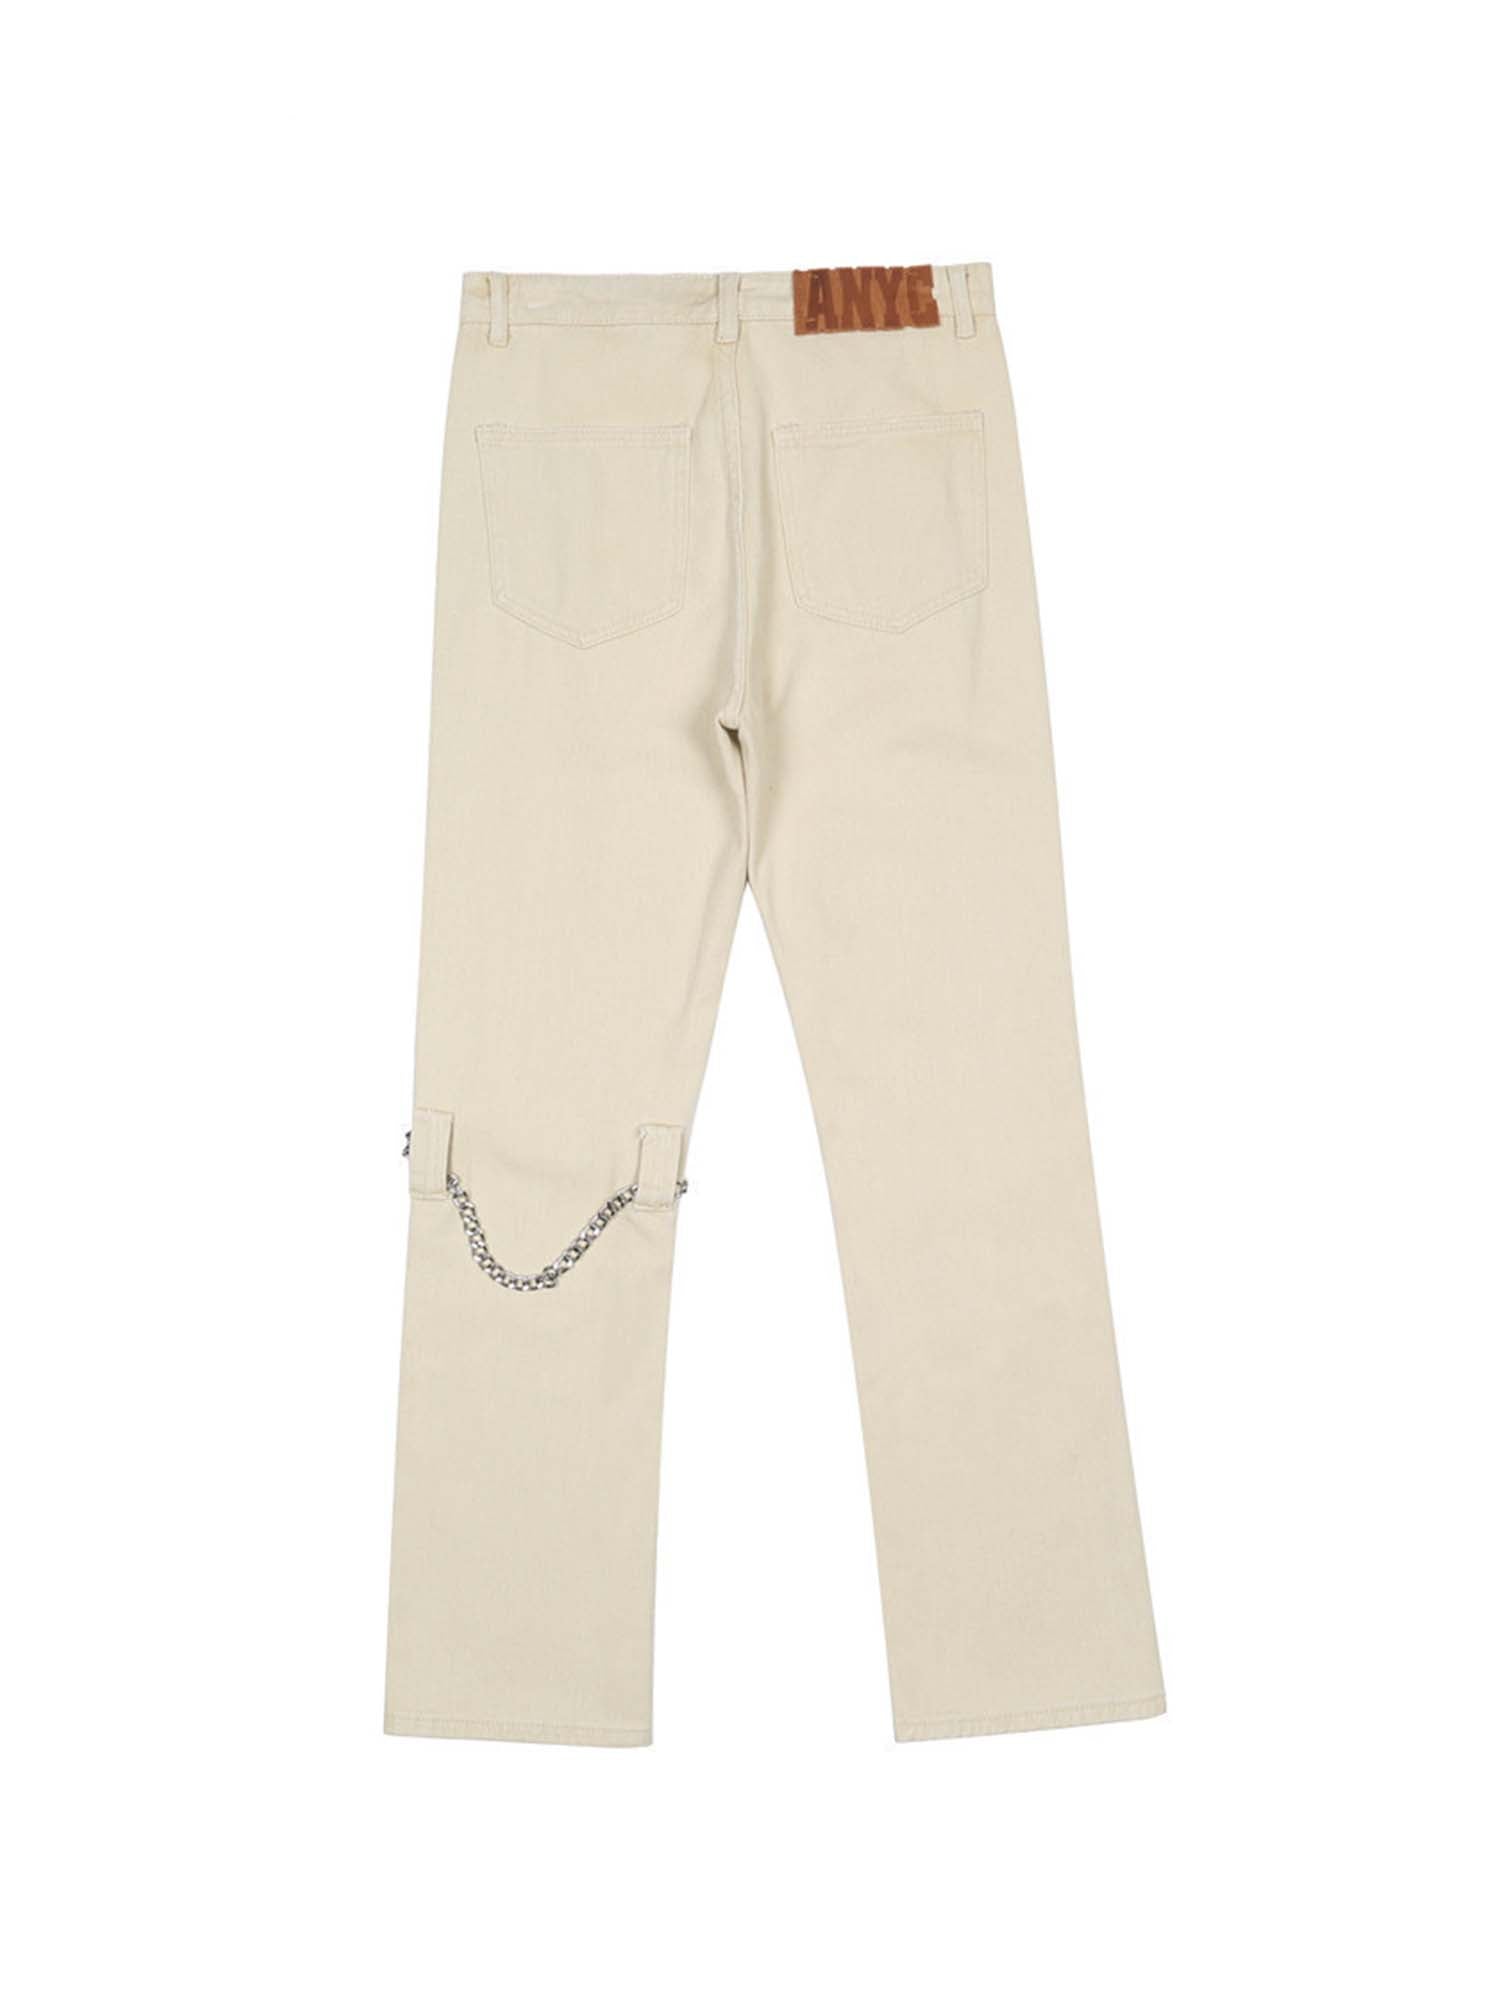 JUSTNOTAG Casual Plain Straight Jeans